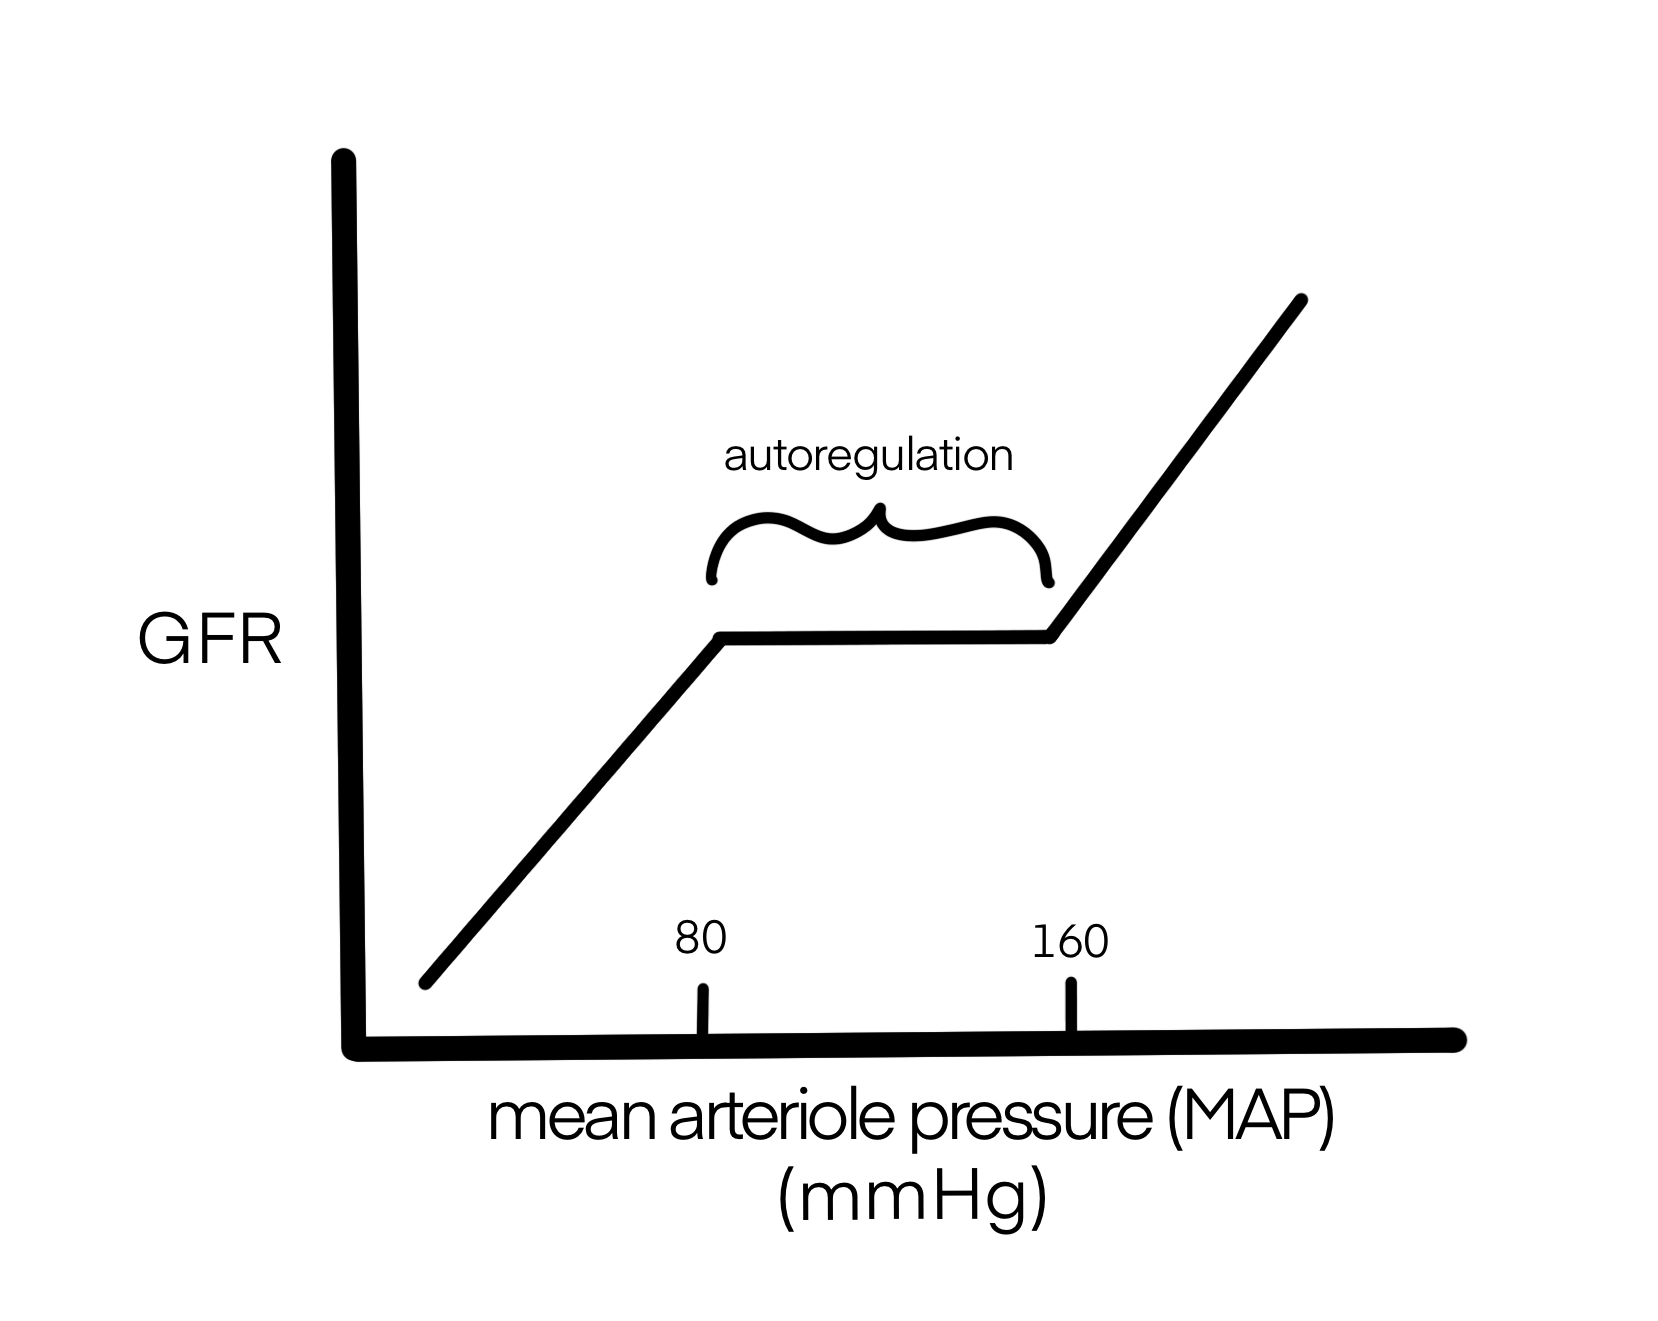 This graph shows that the mechanism of autoregulation keeps GFR constant over a range of mean arterial pressures.